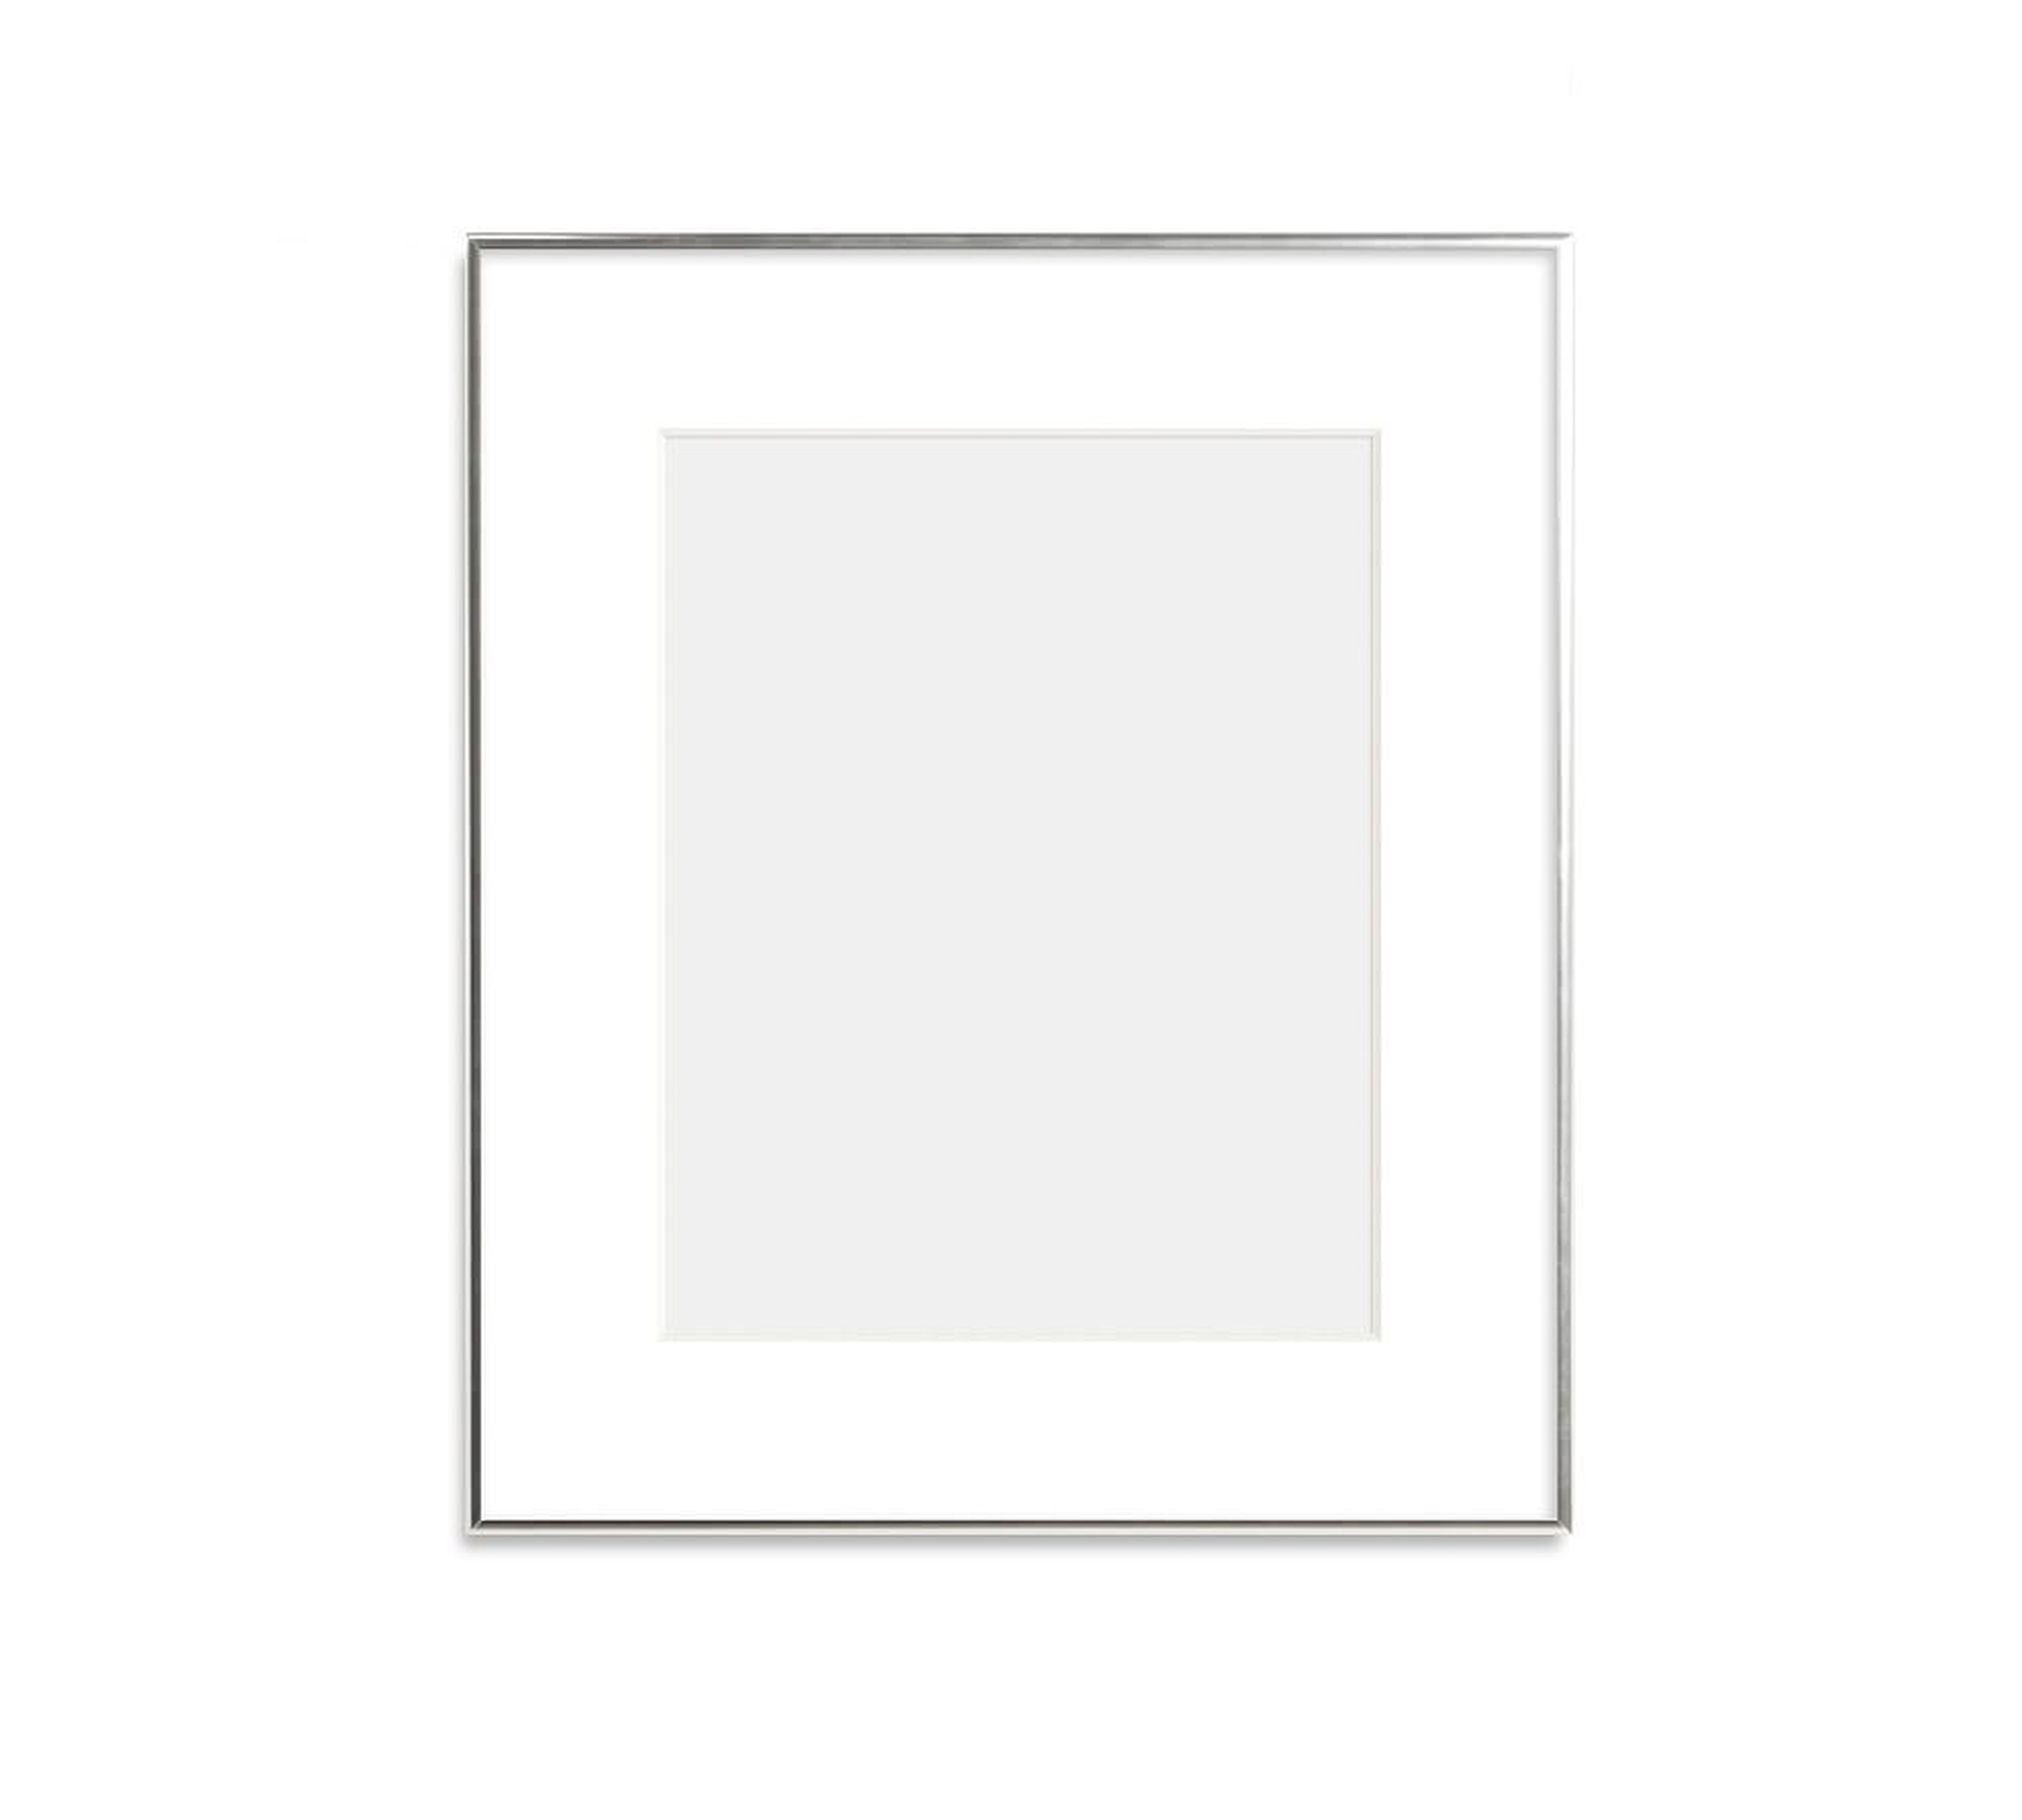 Thin Metal Gallery Frame, 3" Mat, 11x14 - Bright Silver - Pottery Barn